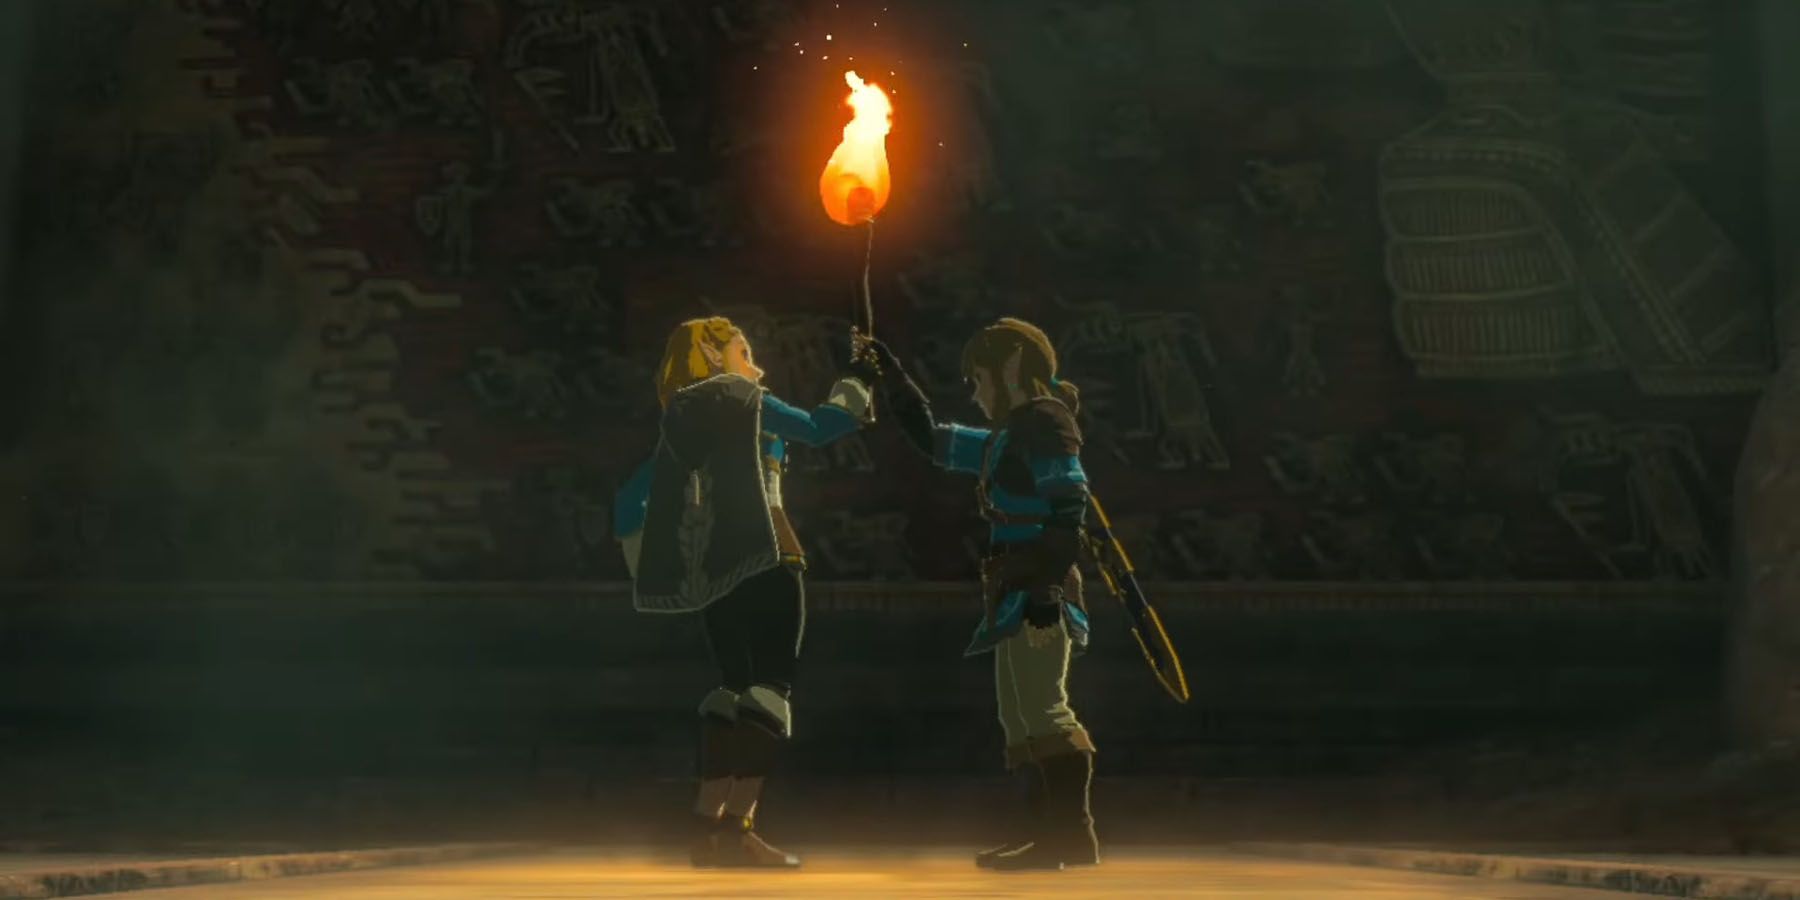 Are Link And Zelda In A Relationship In Tears Of The Kingdom? 